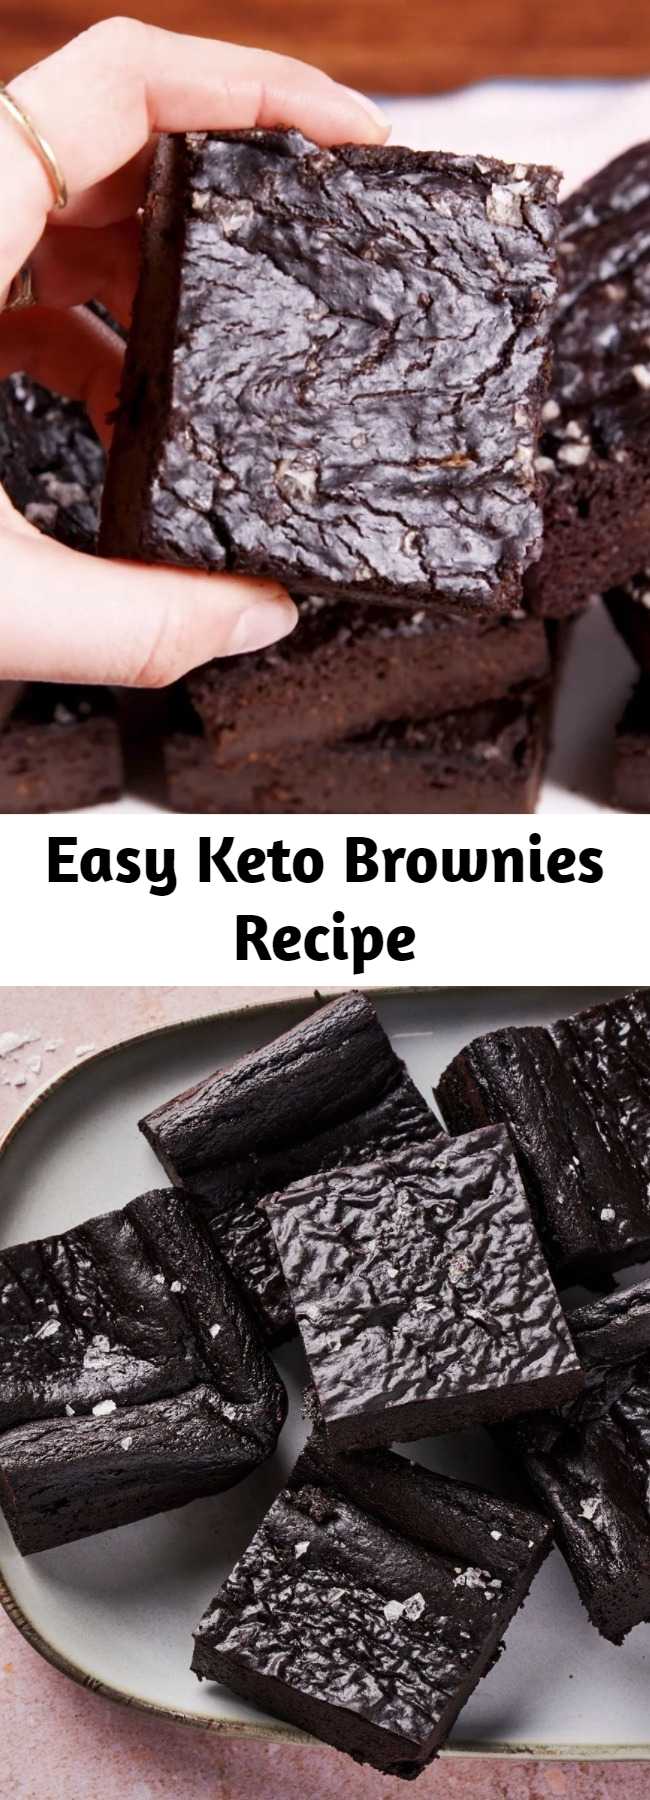 Easy Keto Brownies Recipe - Who says you can't eat brownies when you're on the keto diet?! These keto brownies are the best. When the chocolate craving is strong. #food #easyrecipe #desserts #keto #healthyeating